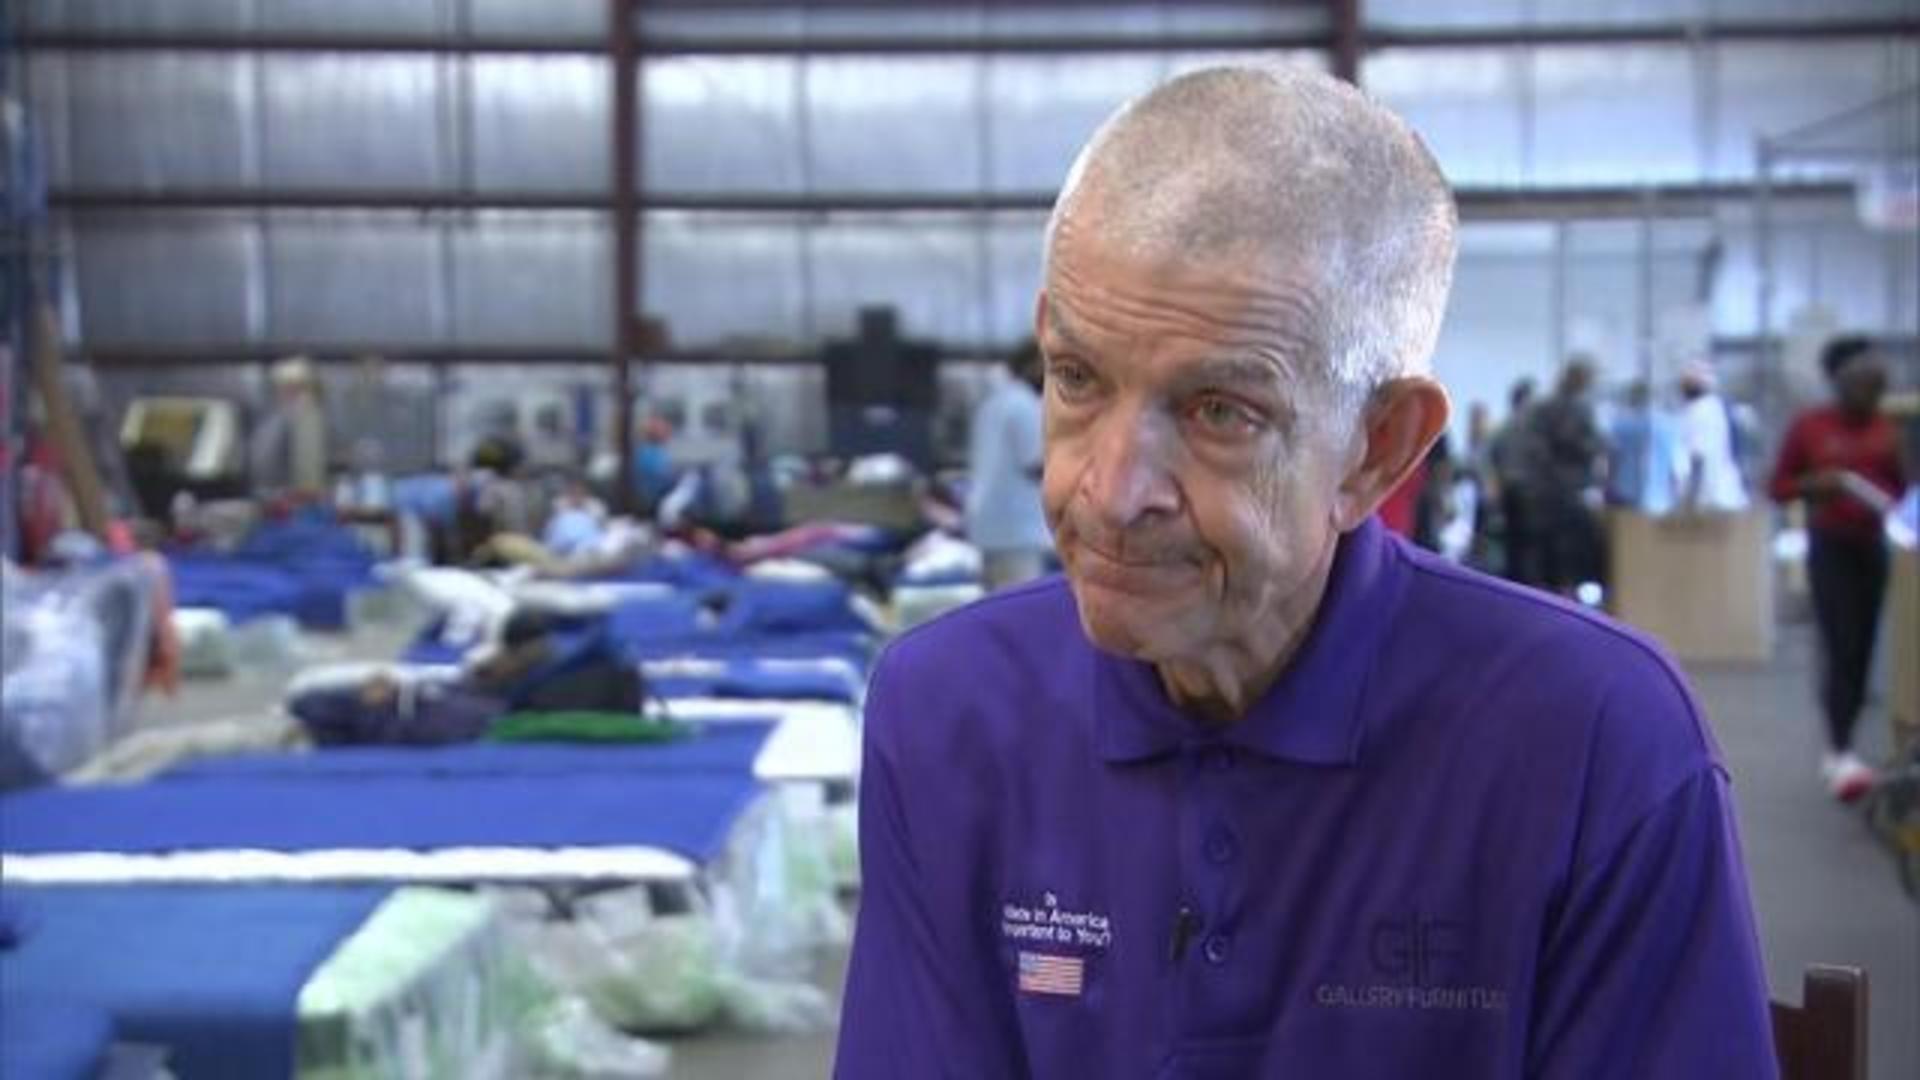 After Harvey, Houston's Mattress Mack shows he has the city's